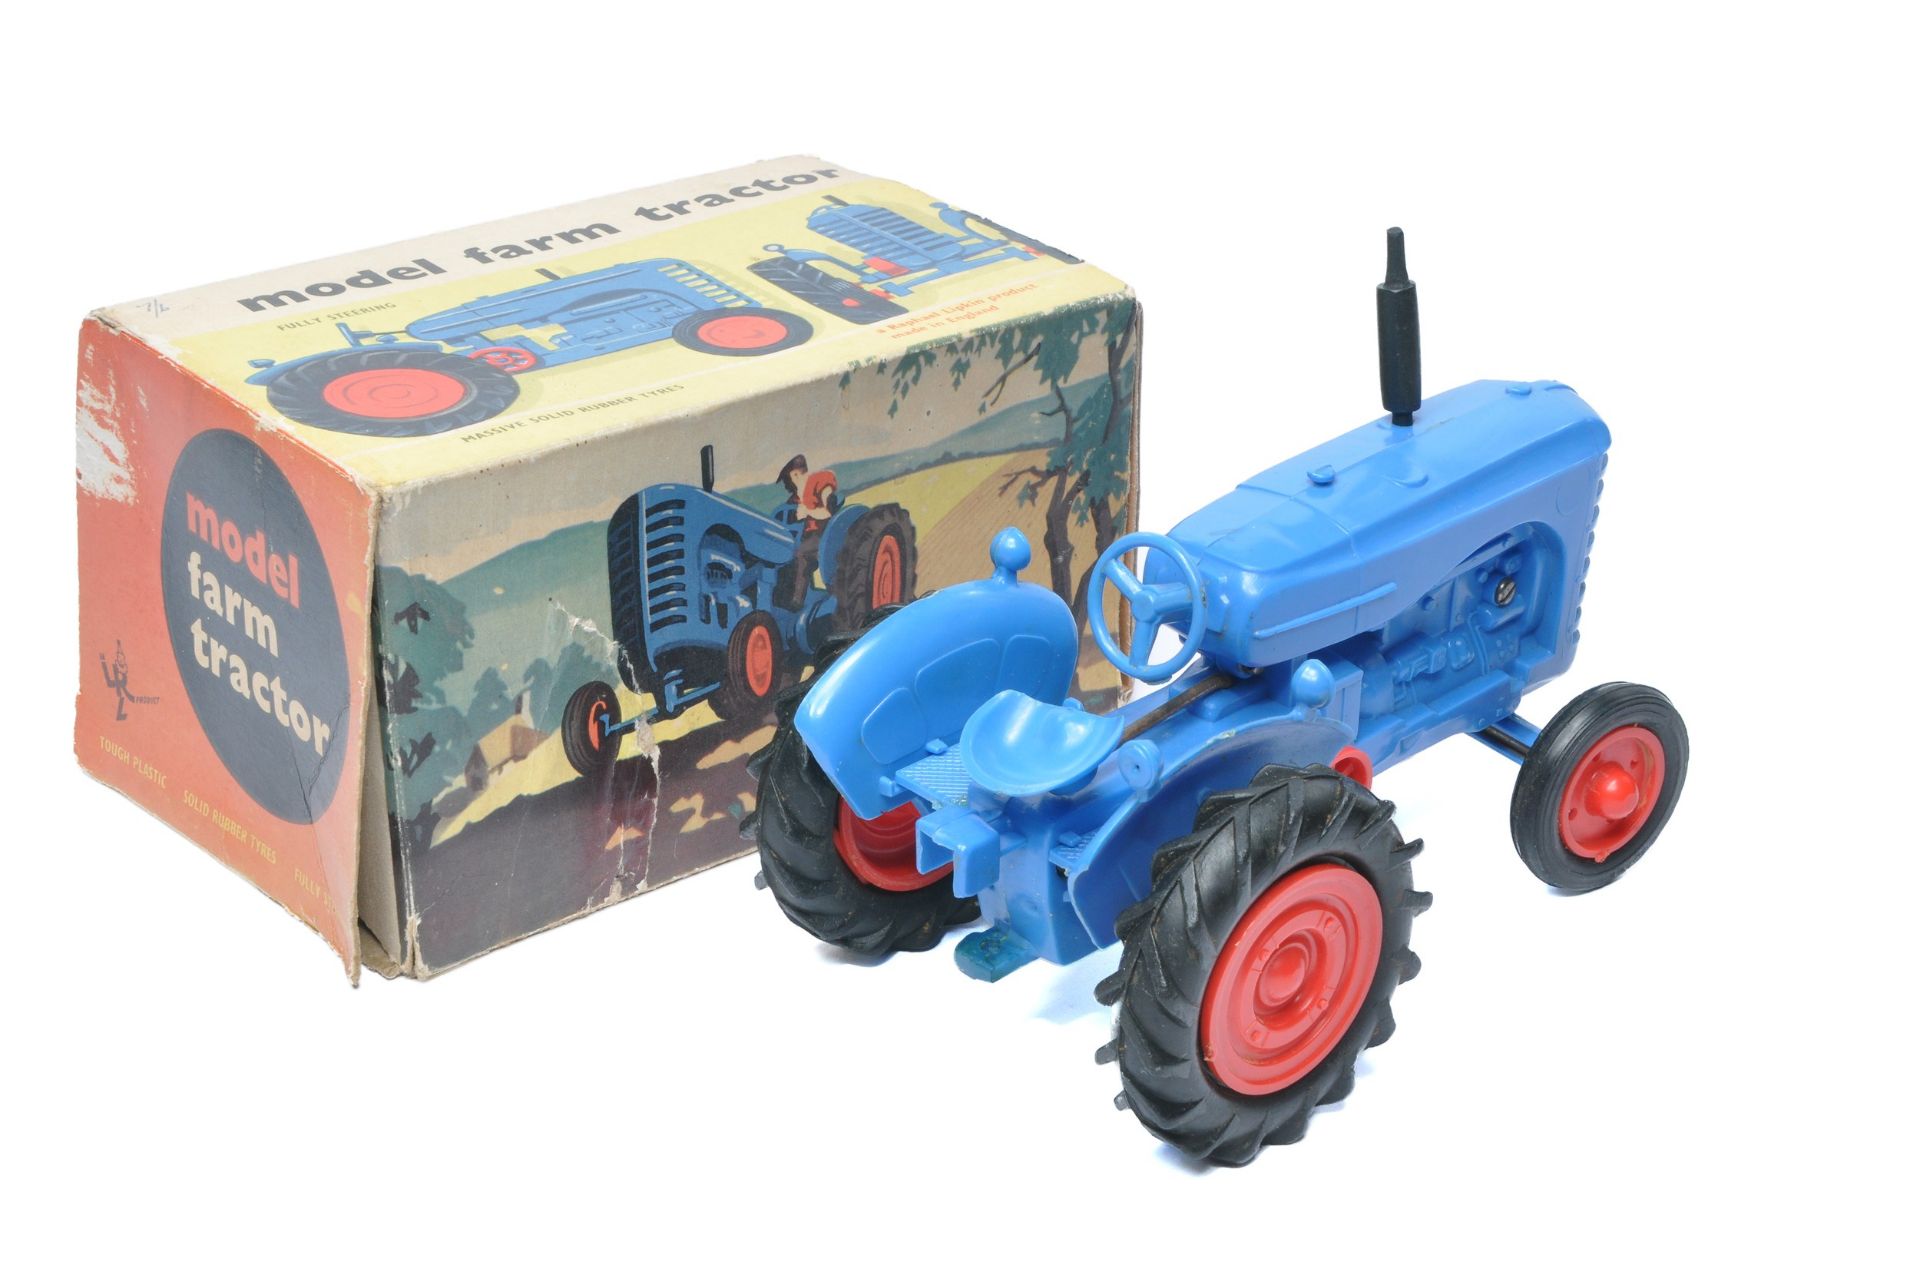 Raphael Lipkin (England) approx 1/24 plastic scale model of the Massey Harris Tractor in blue. - Image 2 of 4